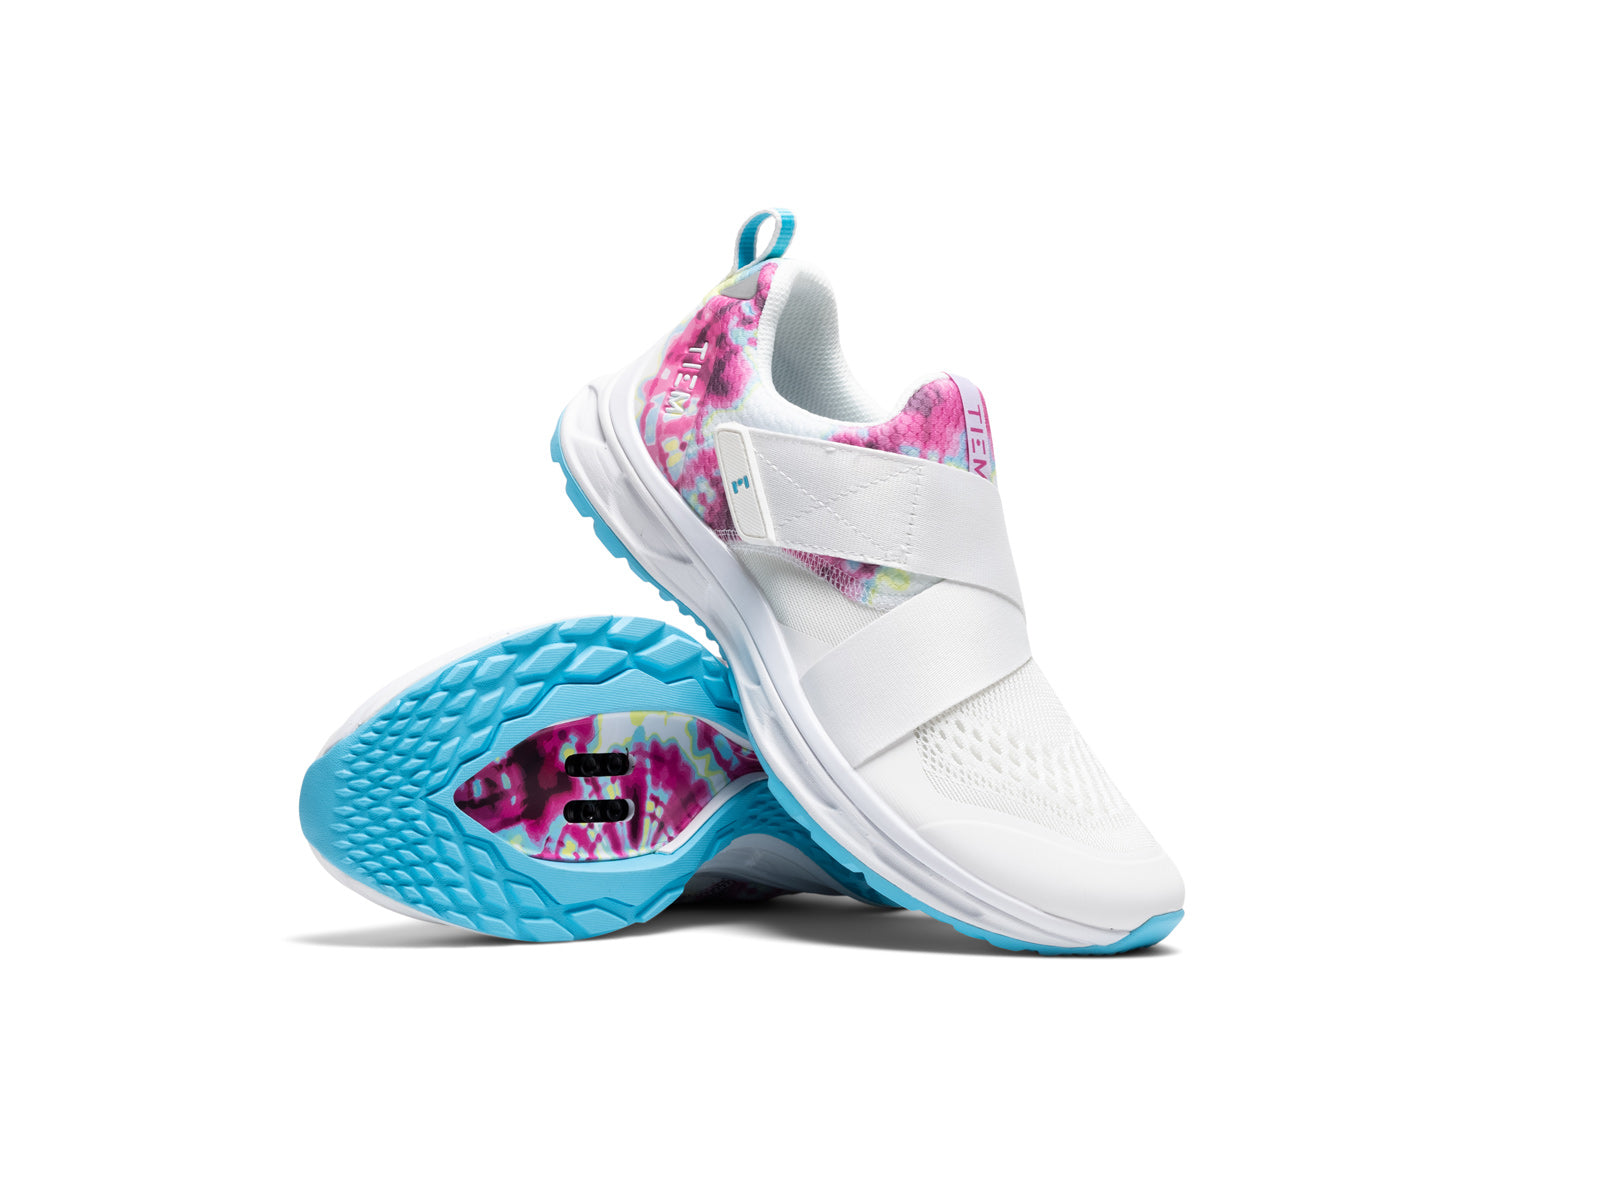 TIEM Athletic Slipstream Indoor Cycling Shoes | Sole/Side View | Tie Dye